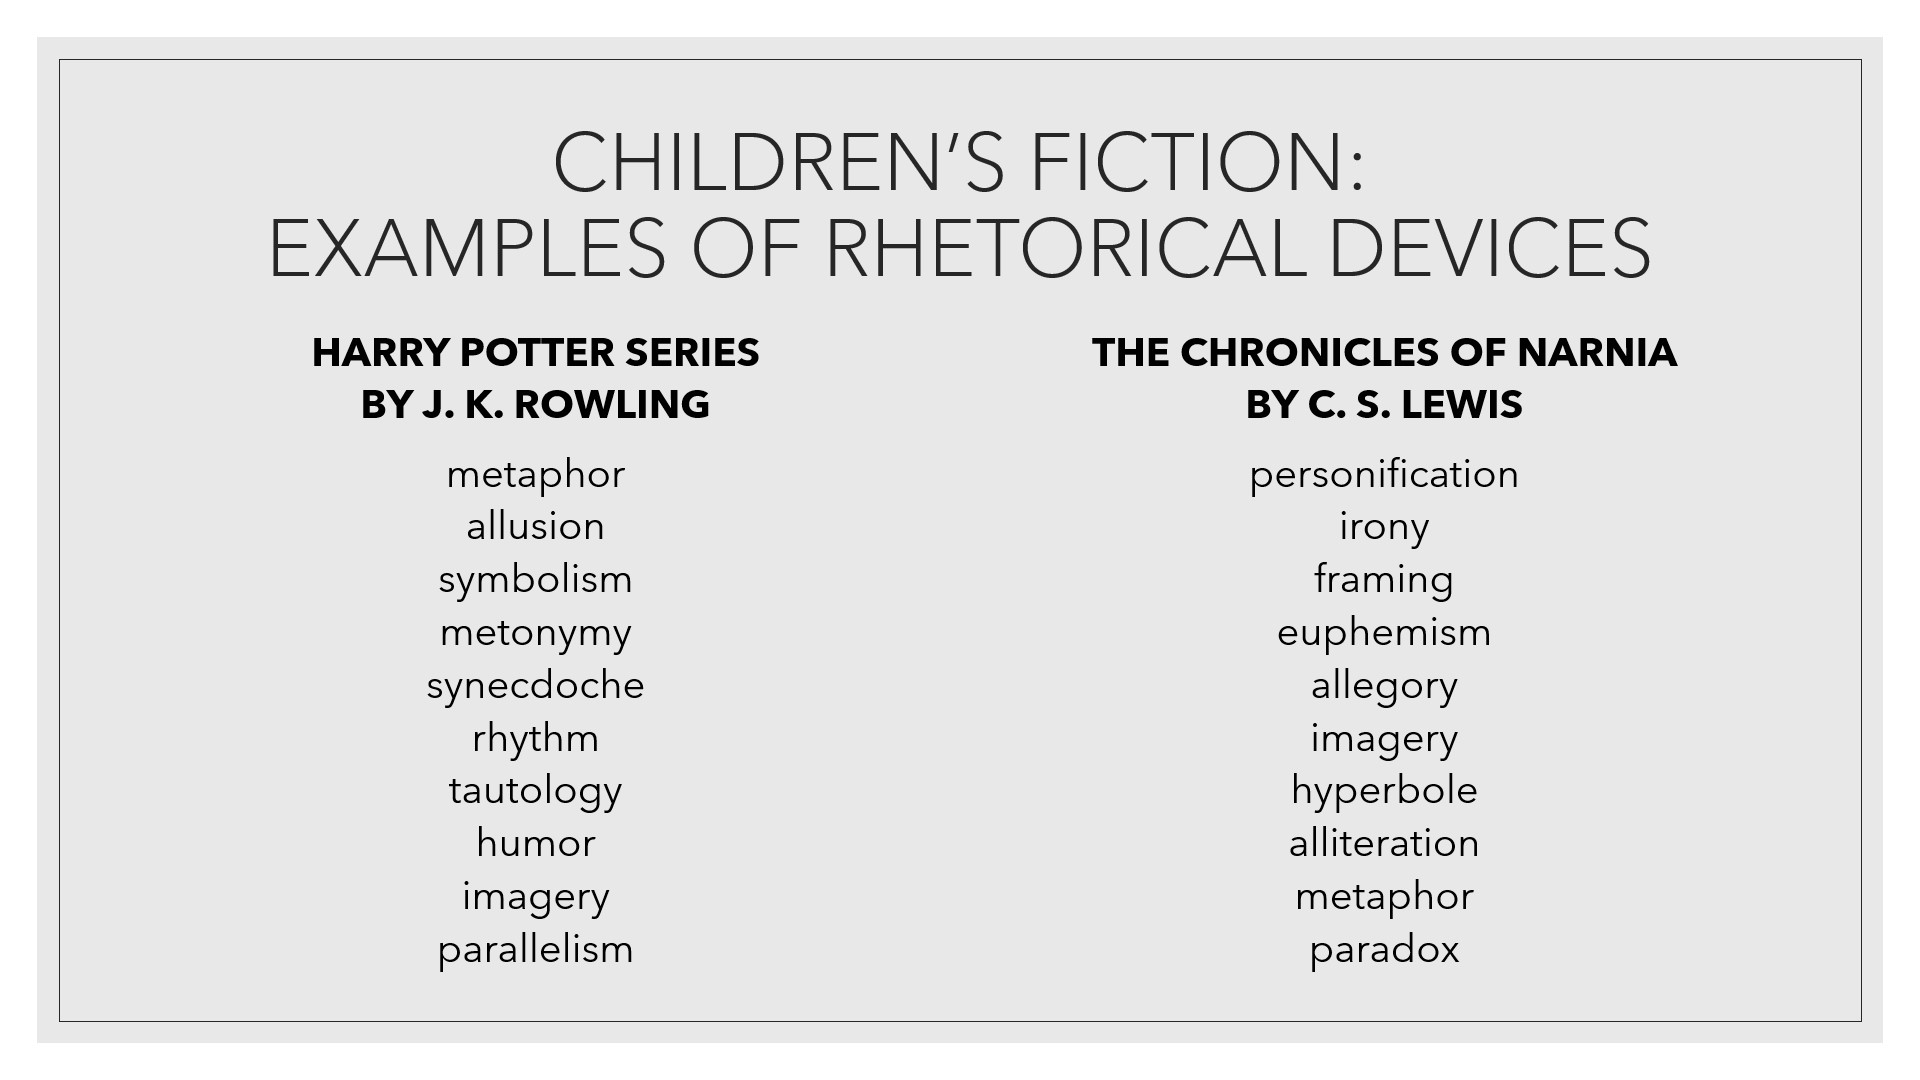 a list of rhetorical devices in harry potter and narnia, including metaphor, allusion, symbolism, personification, irony, euphemism, metonymy, rhythm, imagery, and parallelism